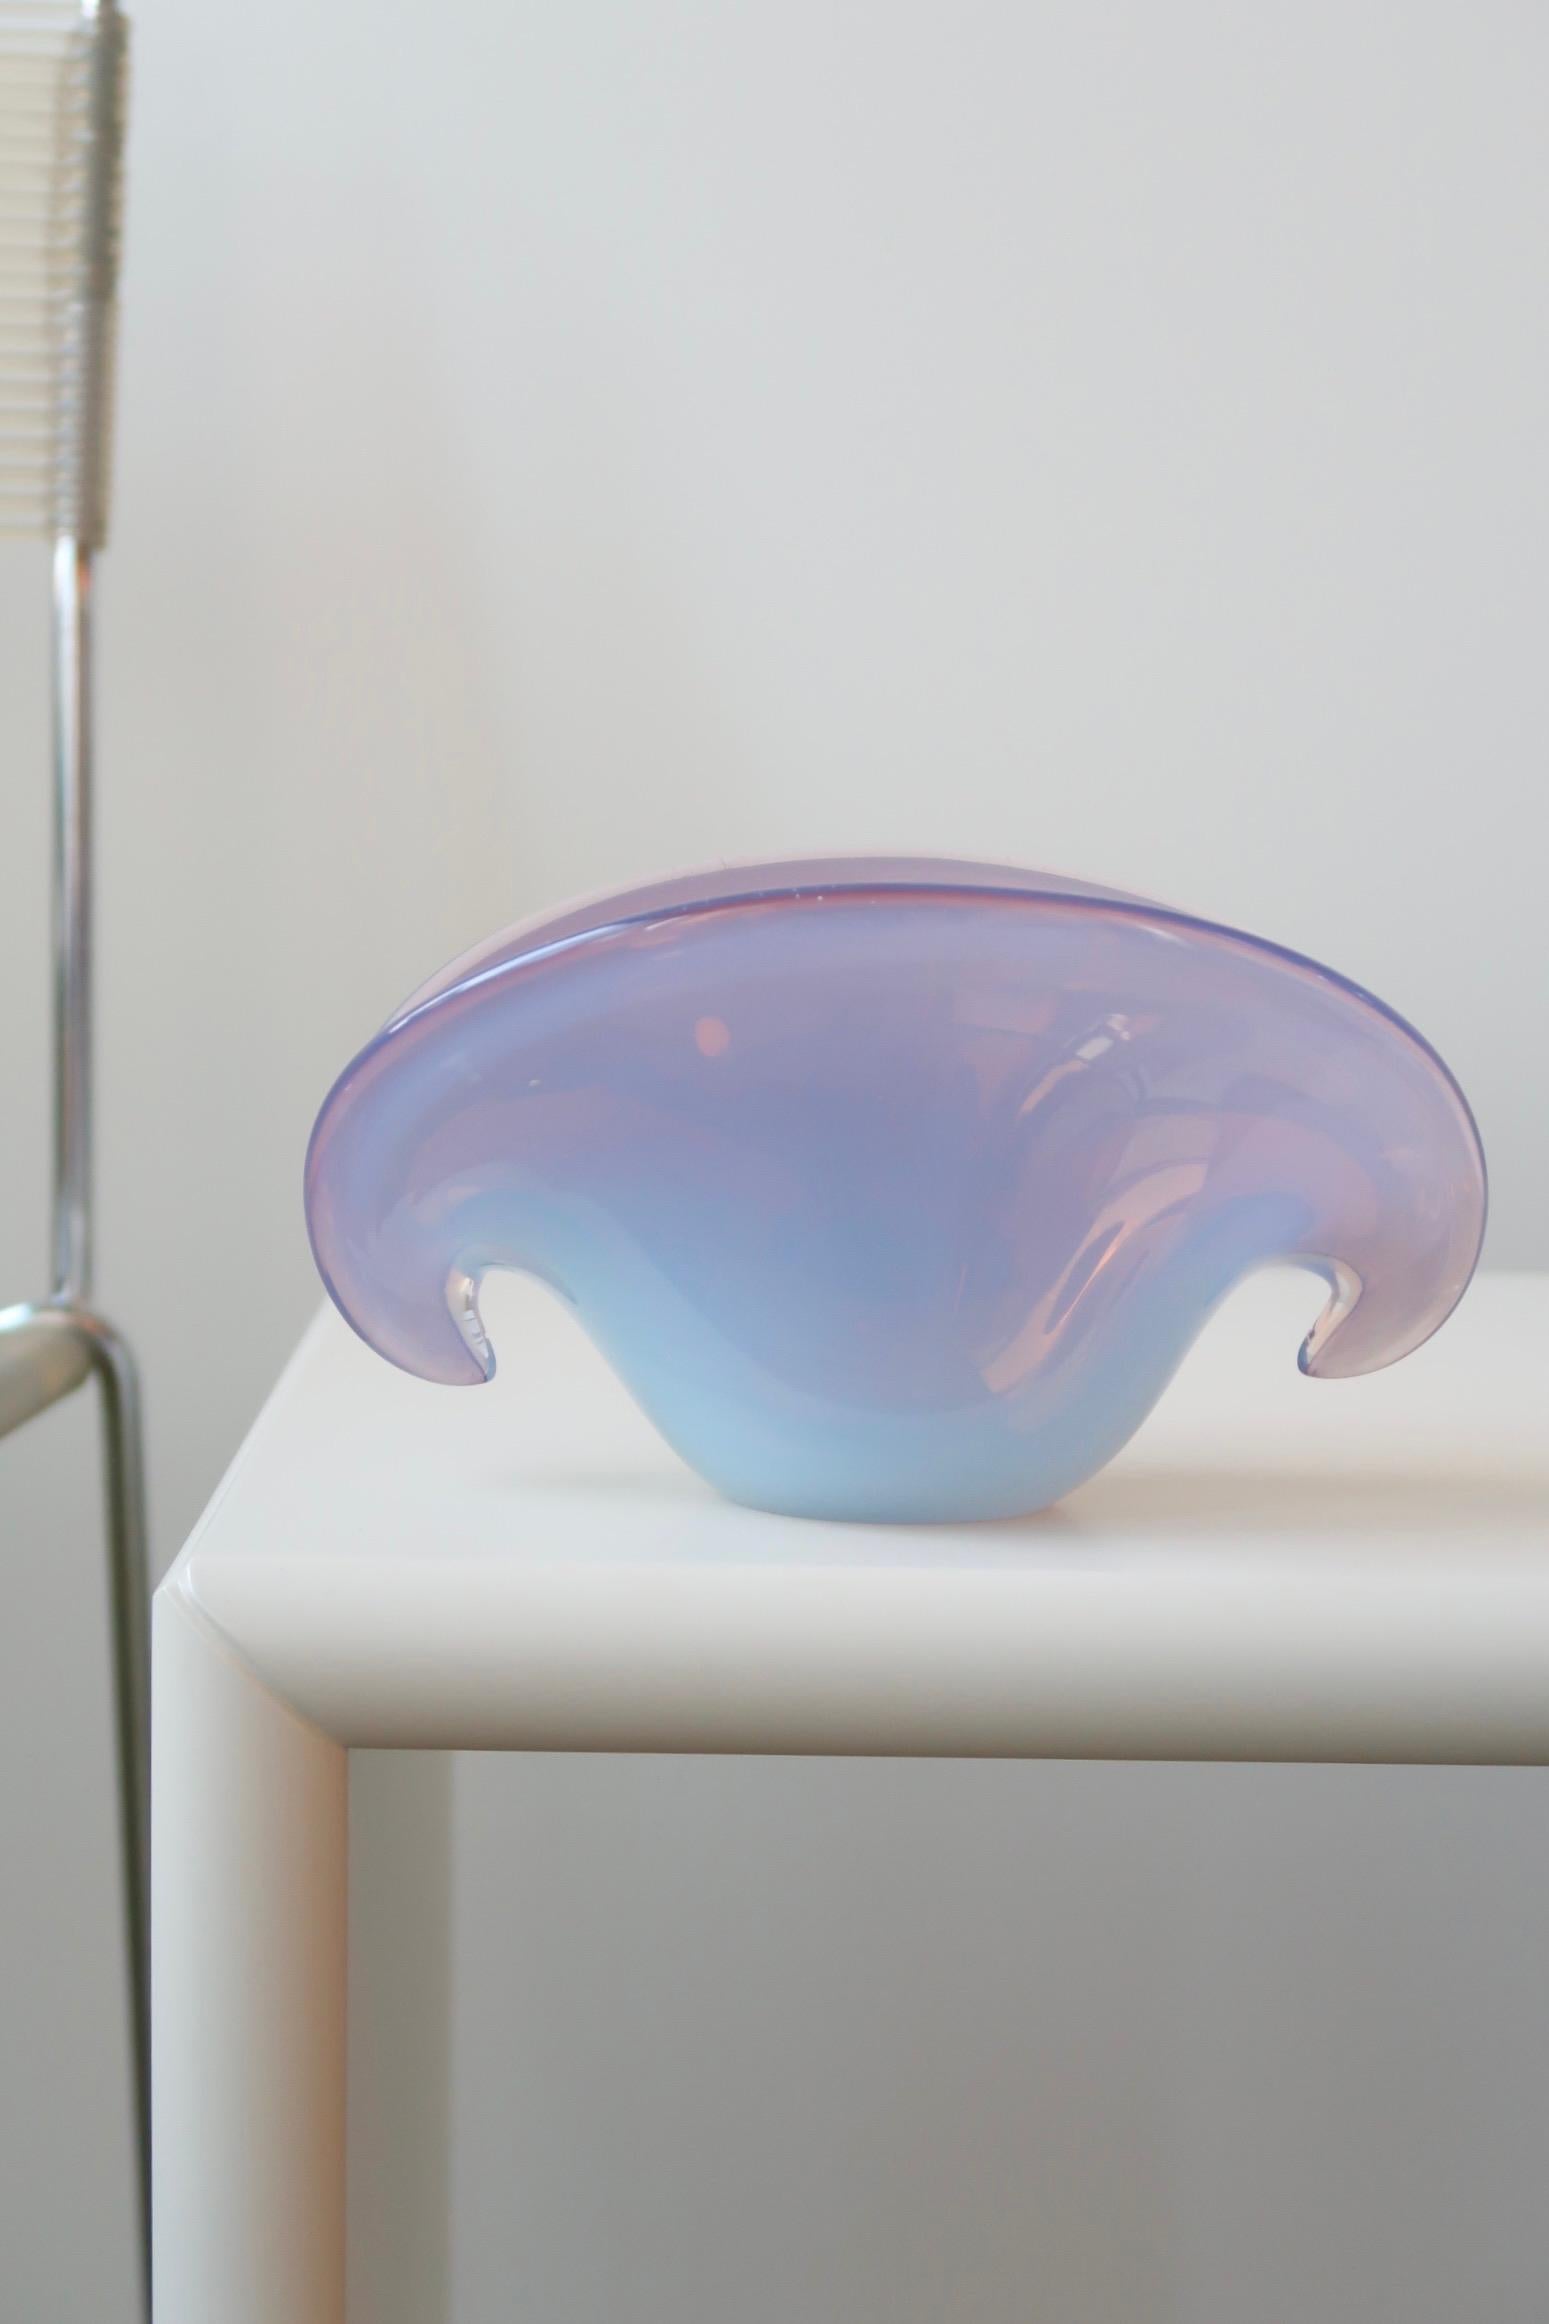 Vintage Murano shell bowl in a beautiful purple tone. Mouth-blown glass in the shape of a shell. The bowl has two bases and can therefore both stand upright or rest on its side. Handmade in Italy, 1960s/70s. Measures: L: 19.5 cm W: 9.5 cm H: 10 cm